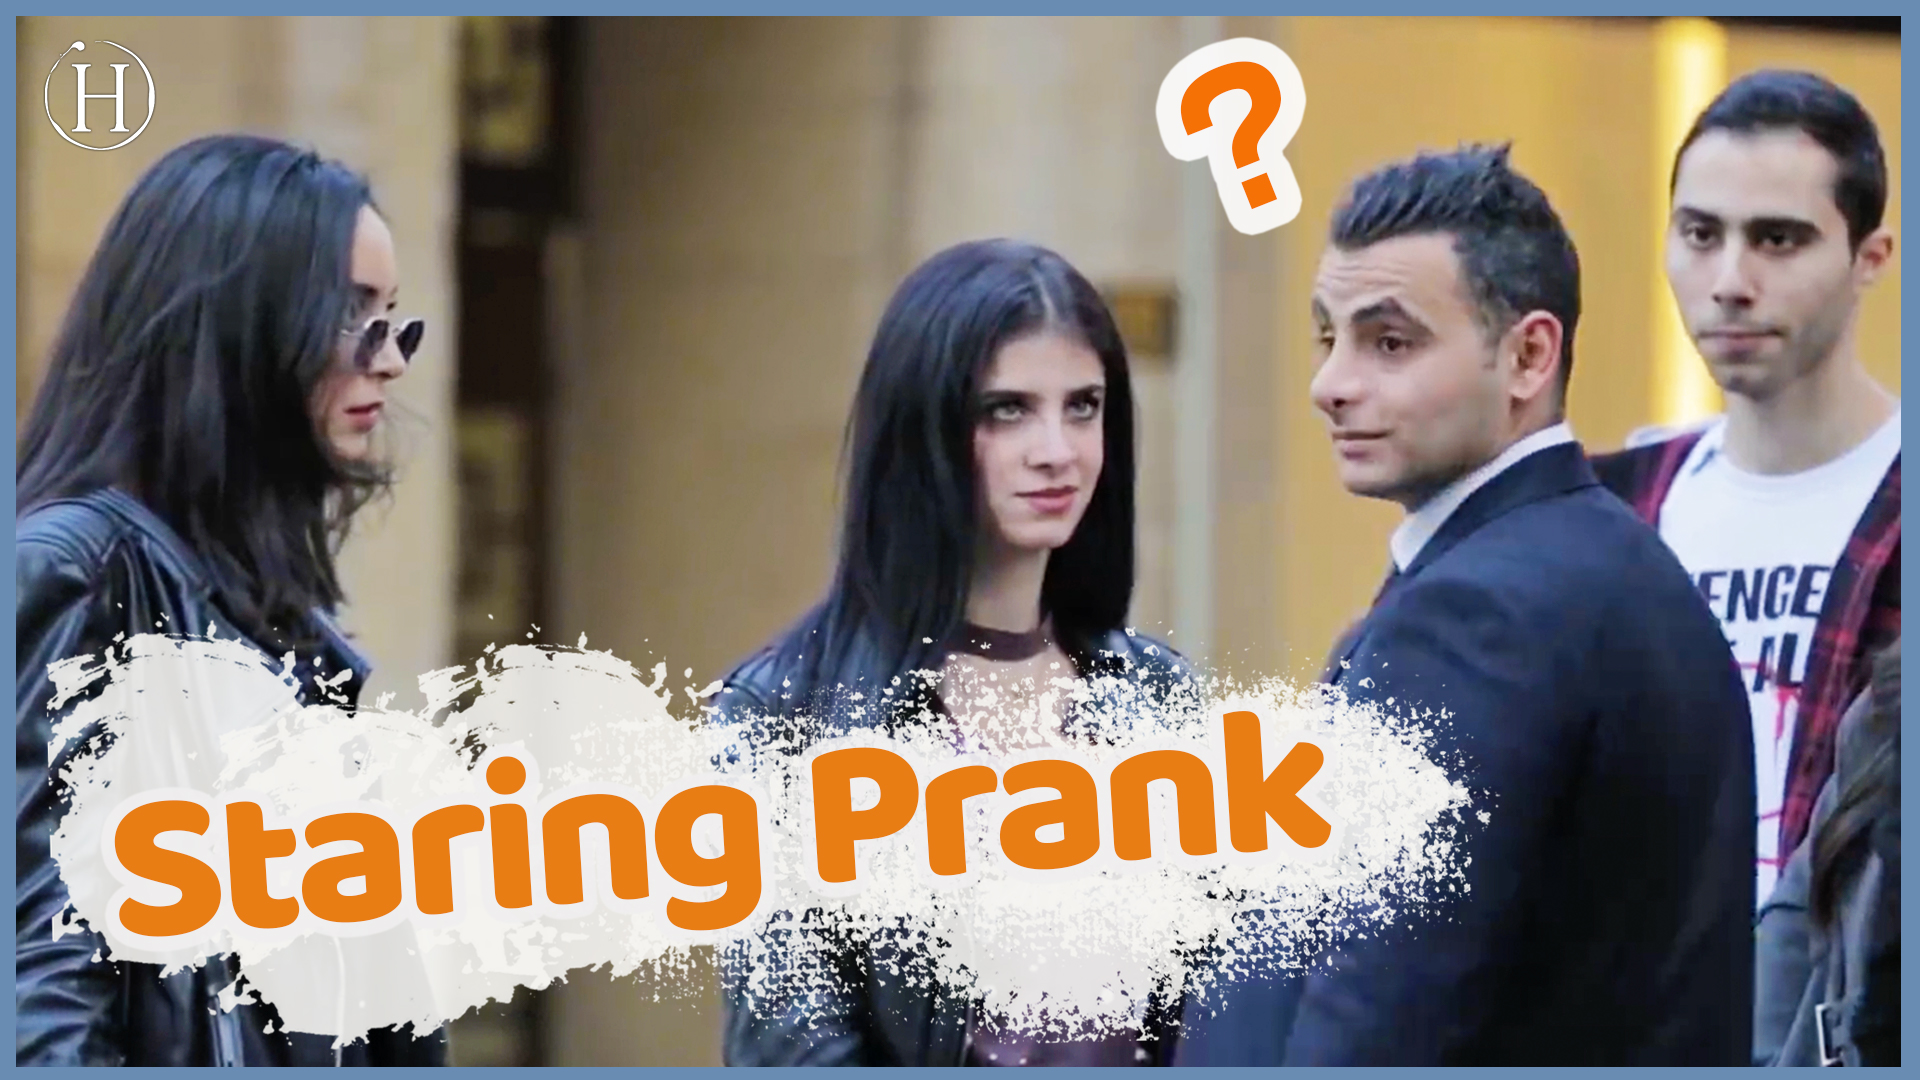 Pranksters Freak Out Strangers | Humanity Life